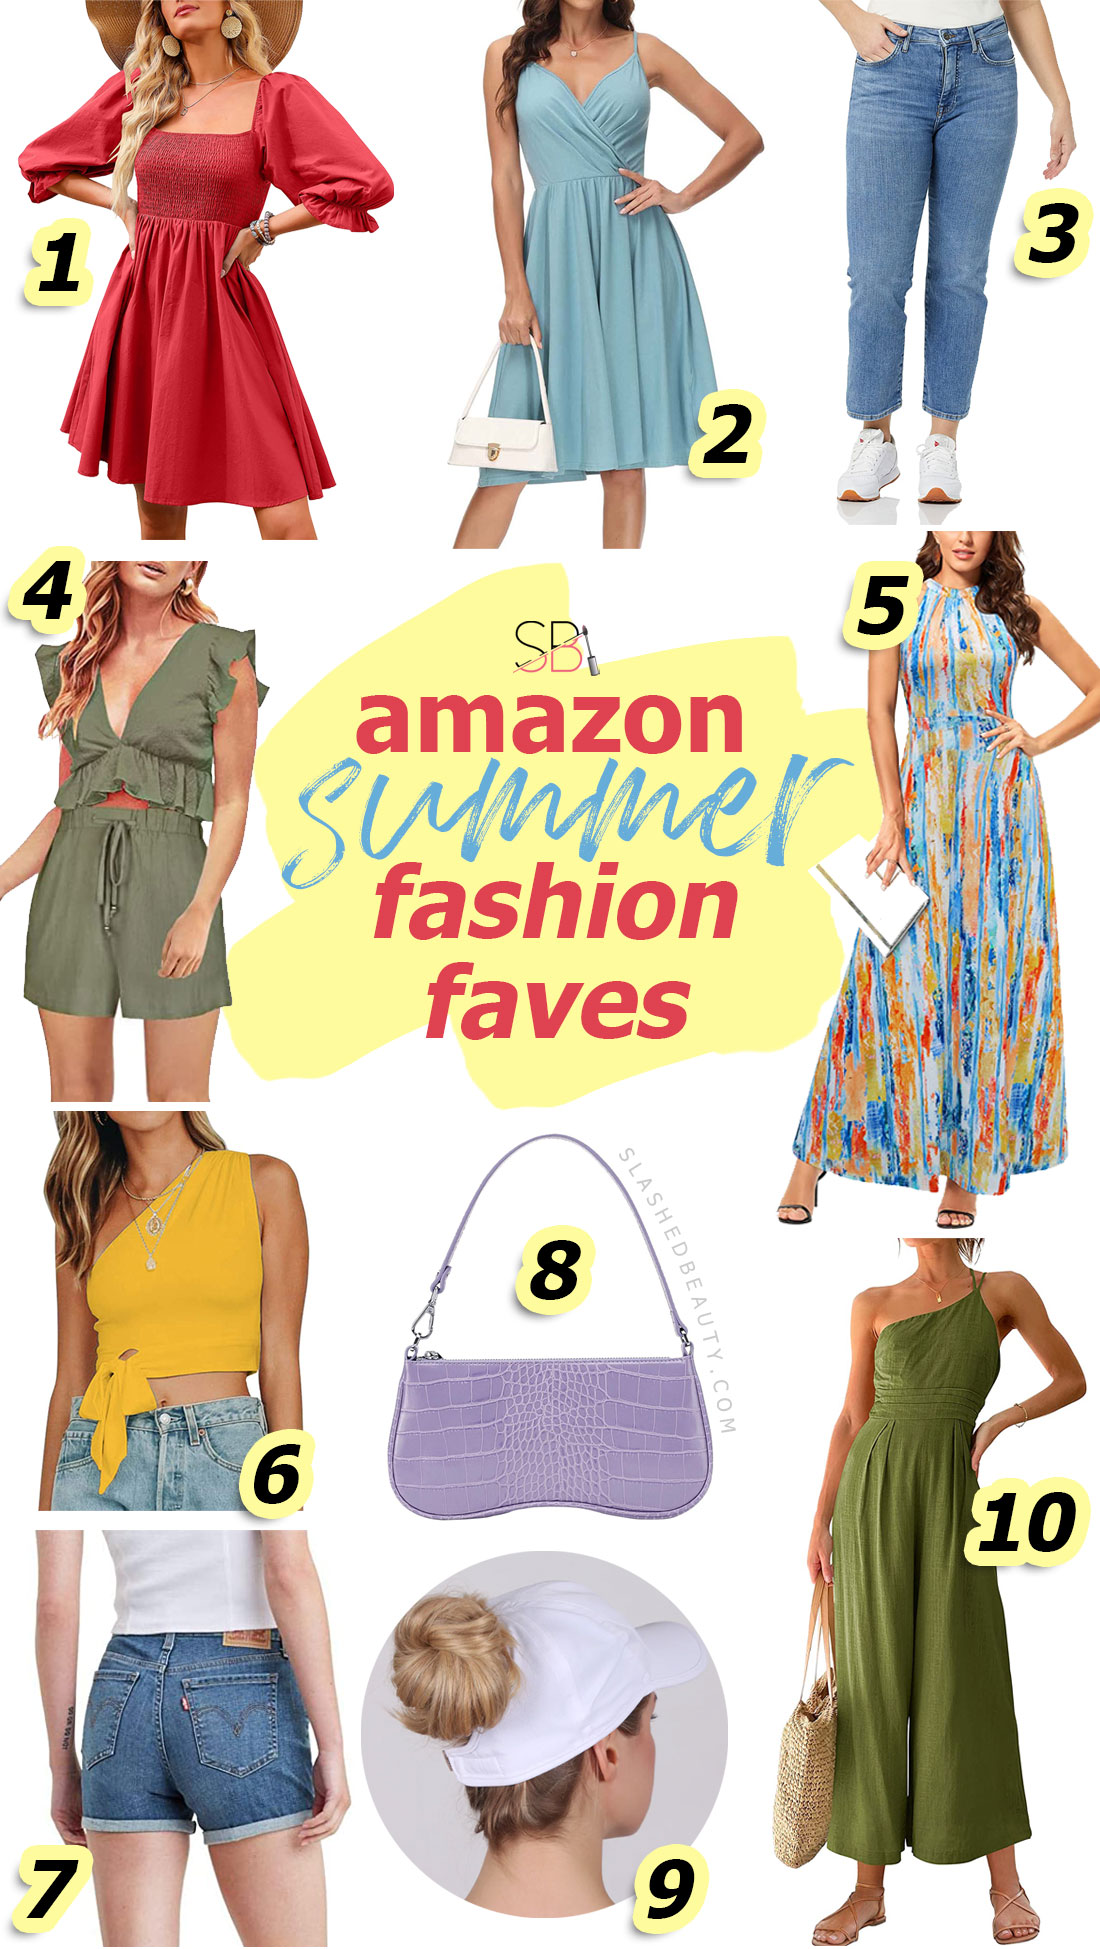 Collage of various summer fashion items with text: Amazon Summer Fashion Faves | The 10 Best Amazon Summer Fashion Finds | Slashed Beauty